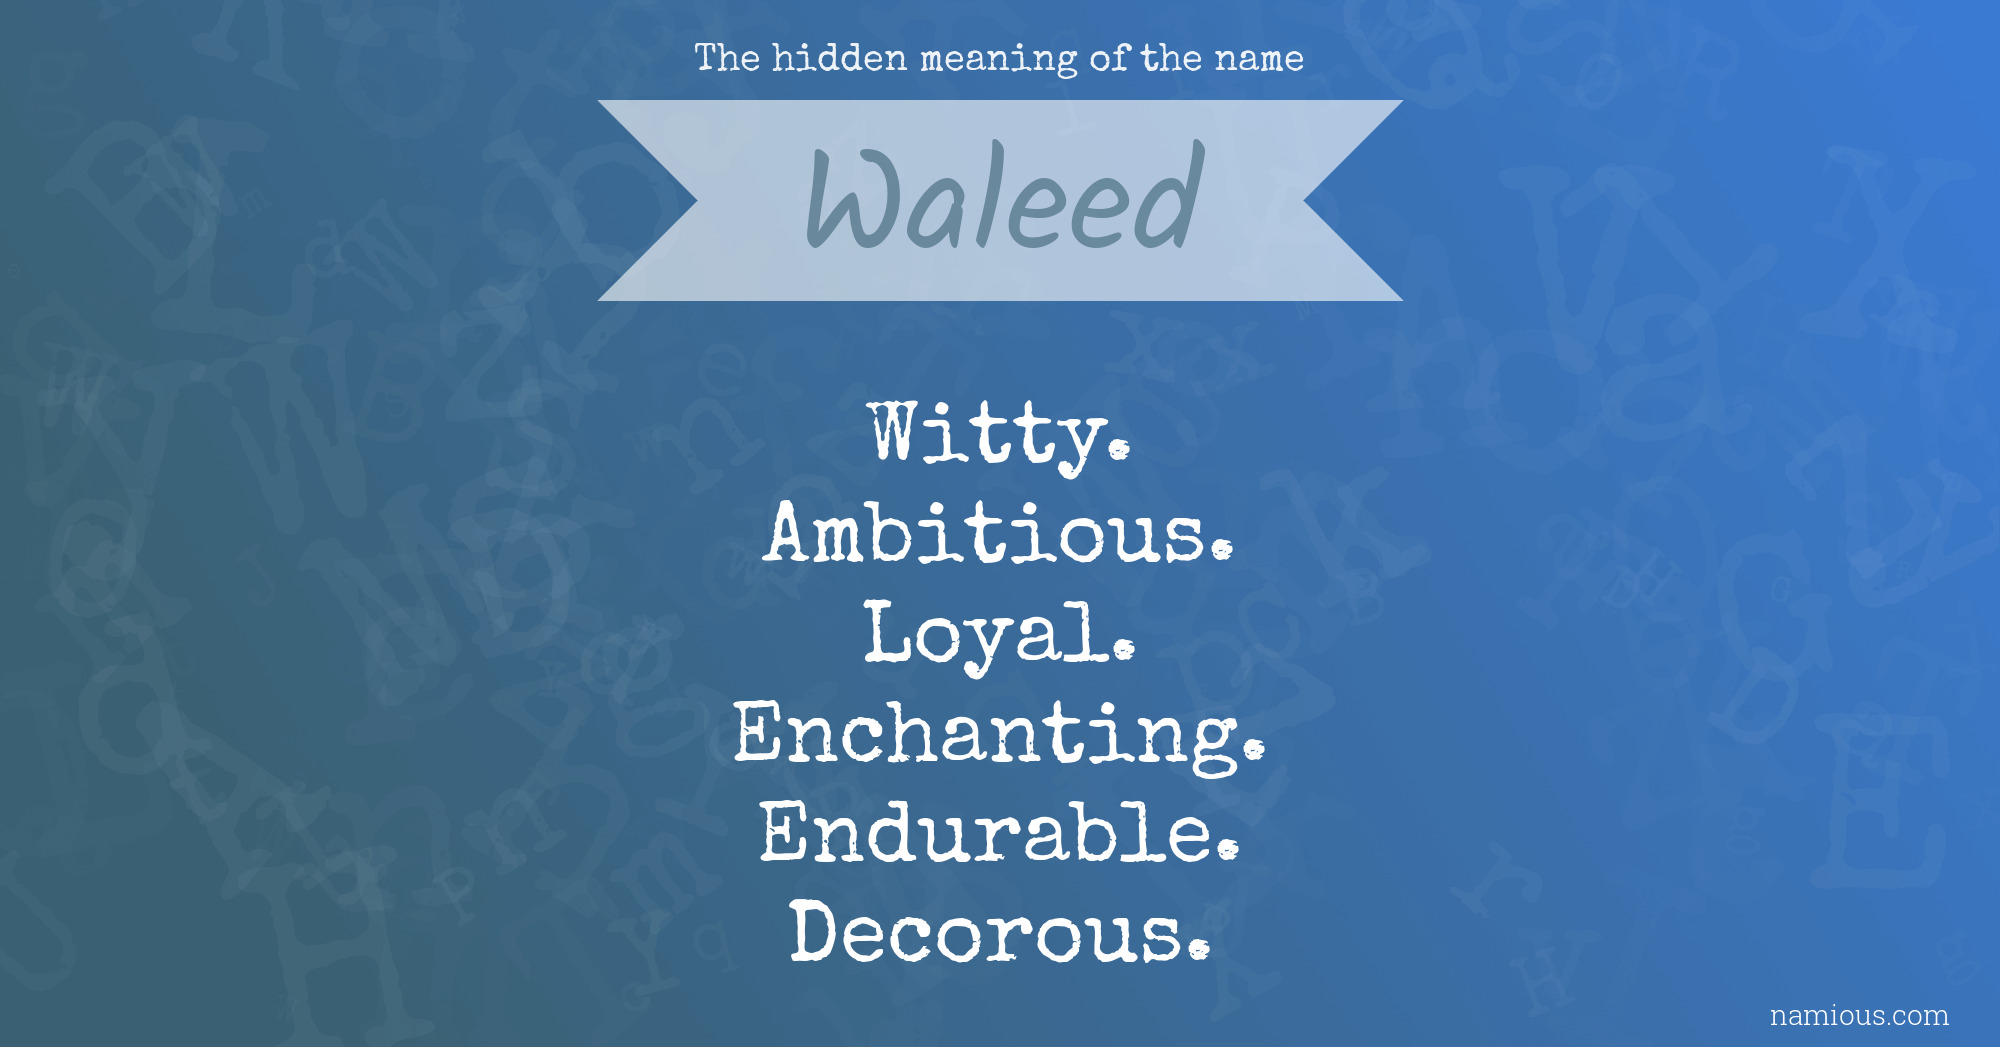 The hidden meaning of the name Waleed